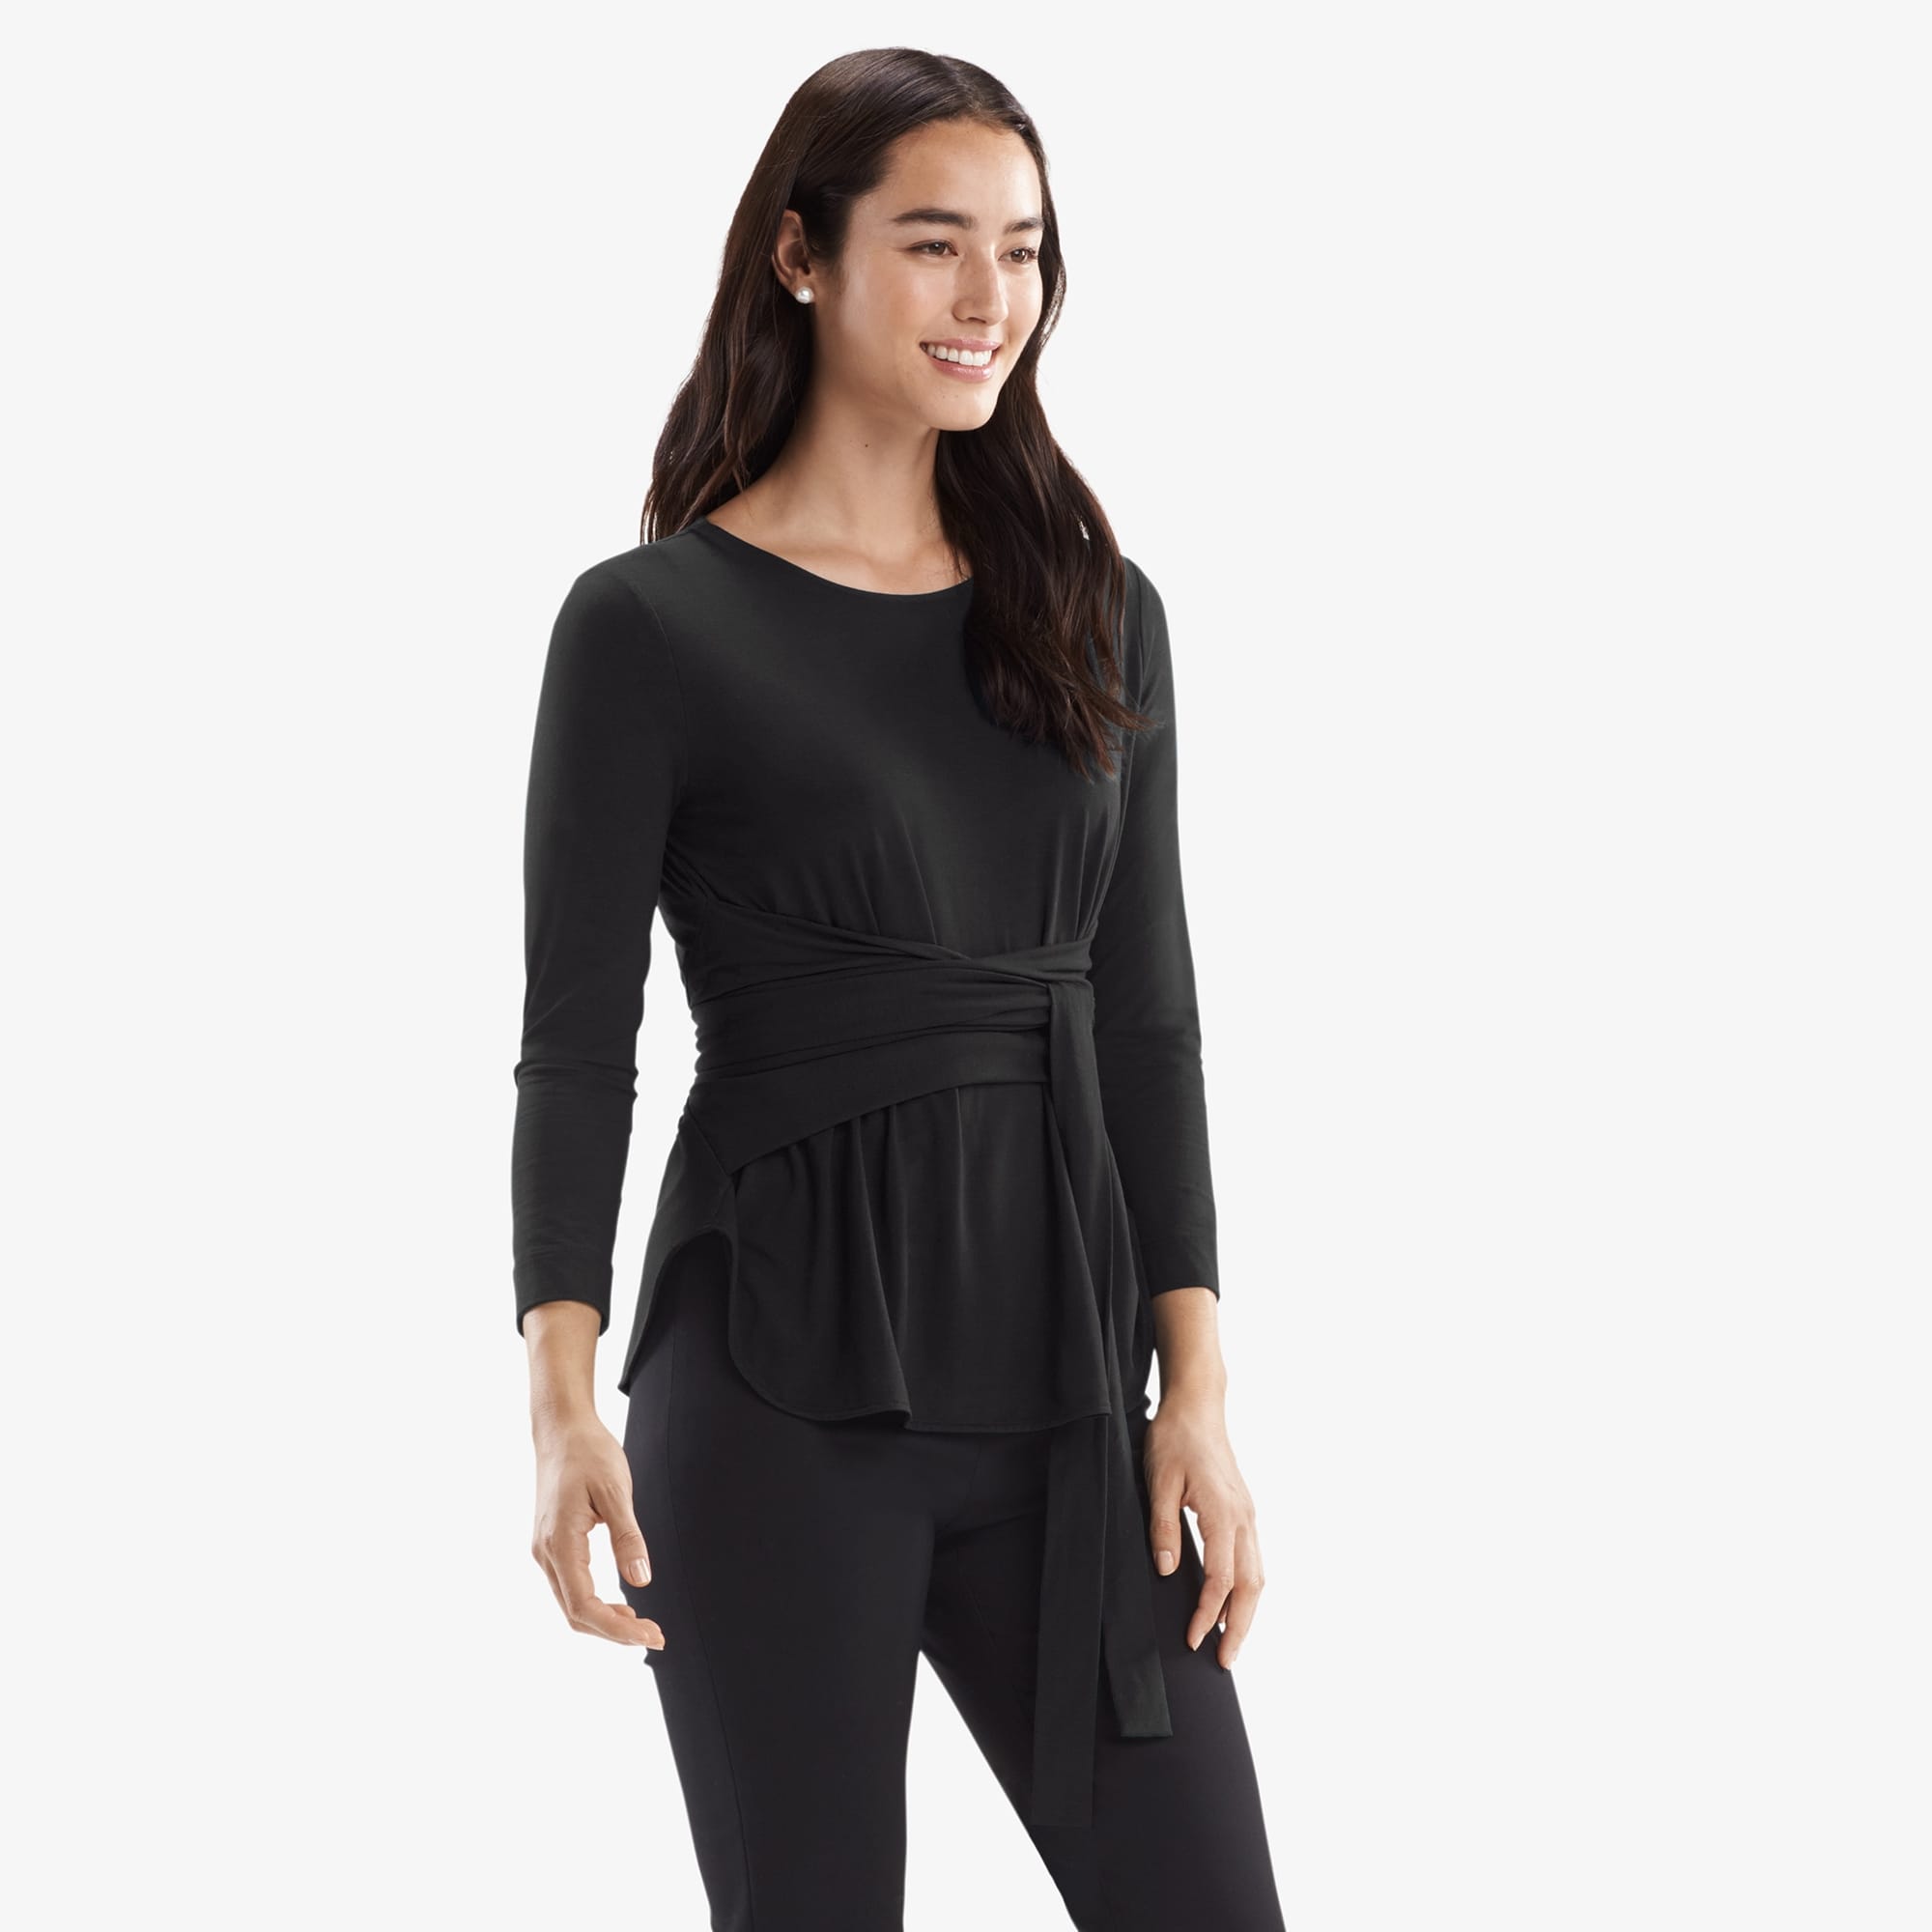 Side image of a woman standing wearing the Walker top knit crepe in Black